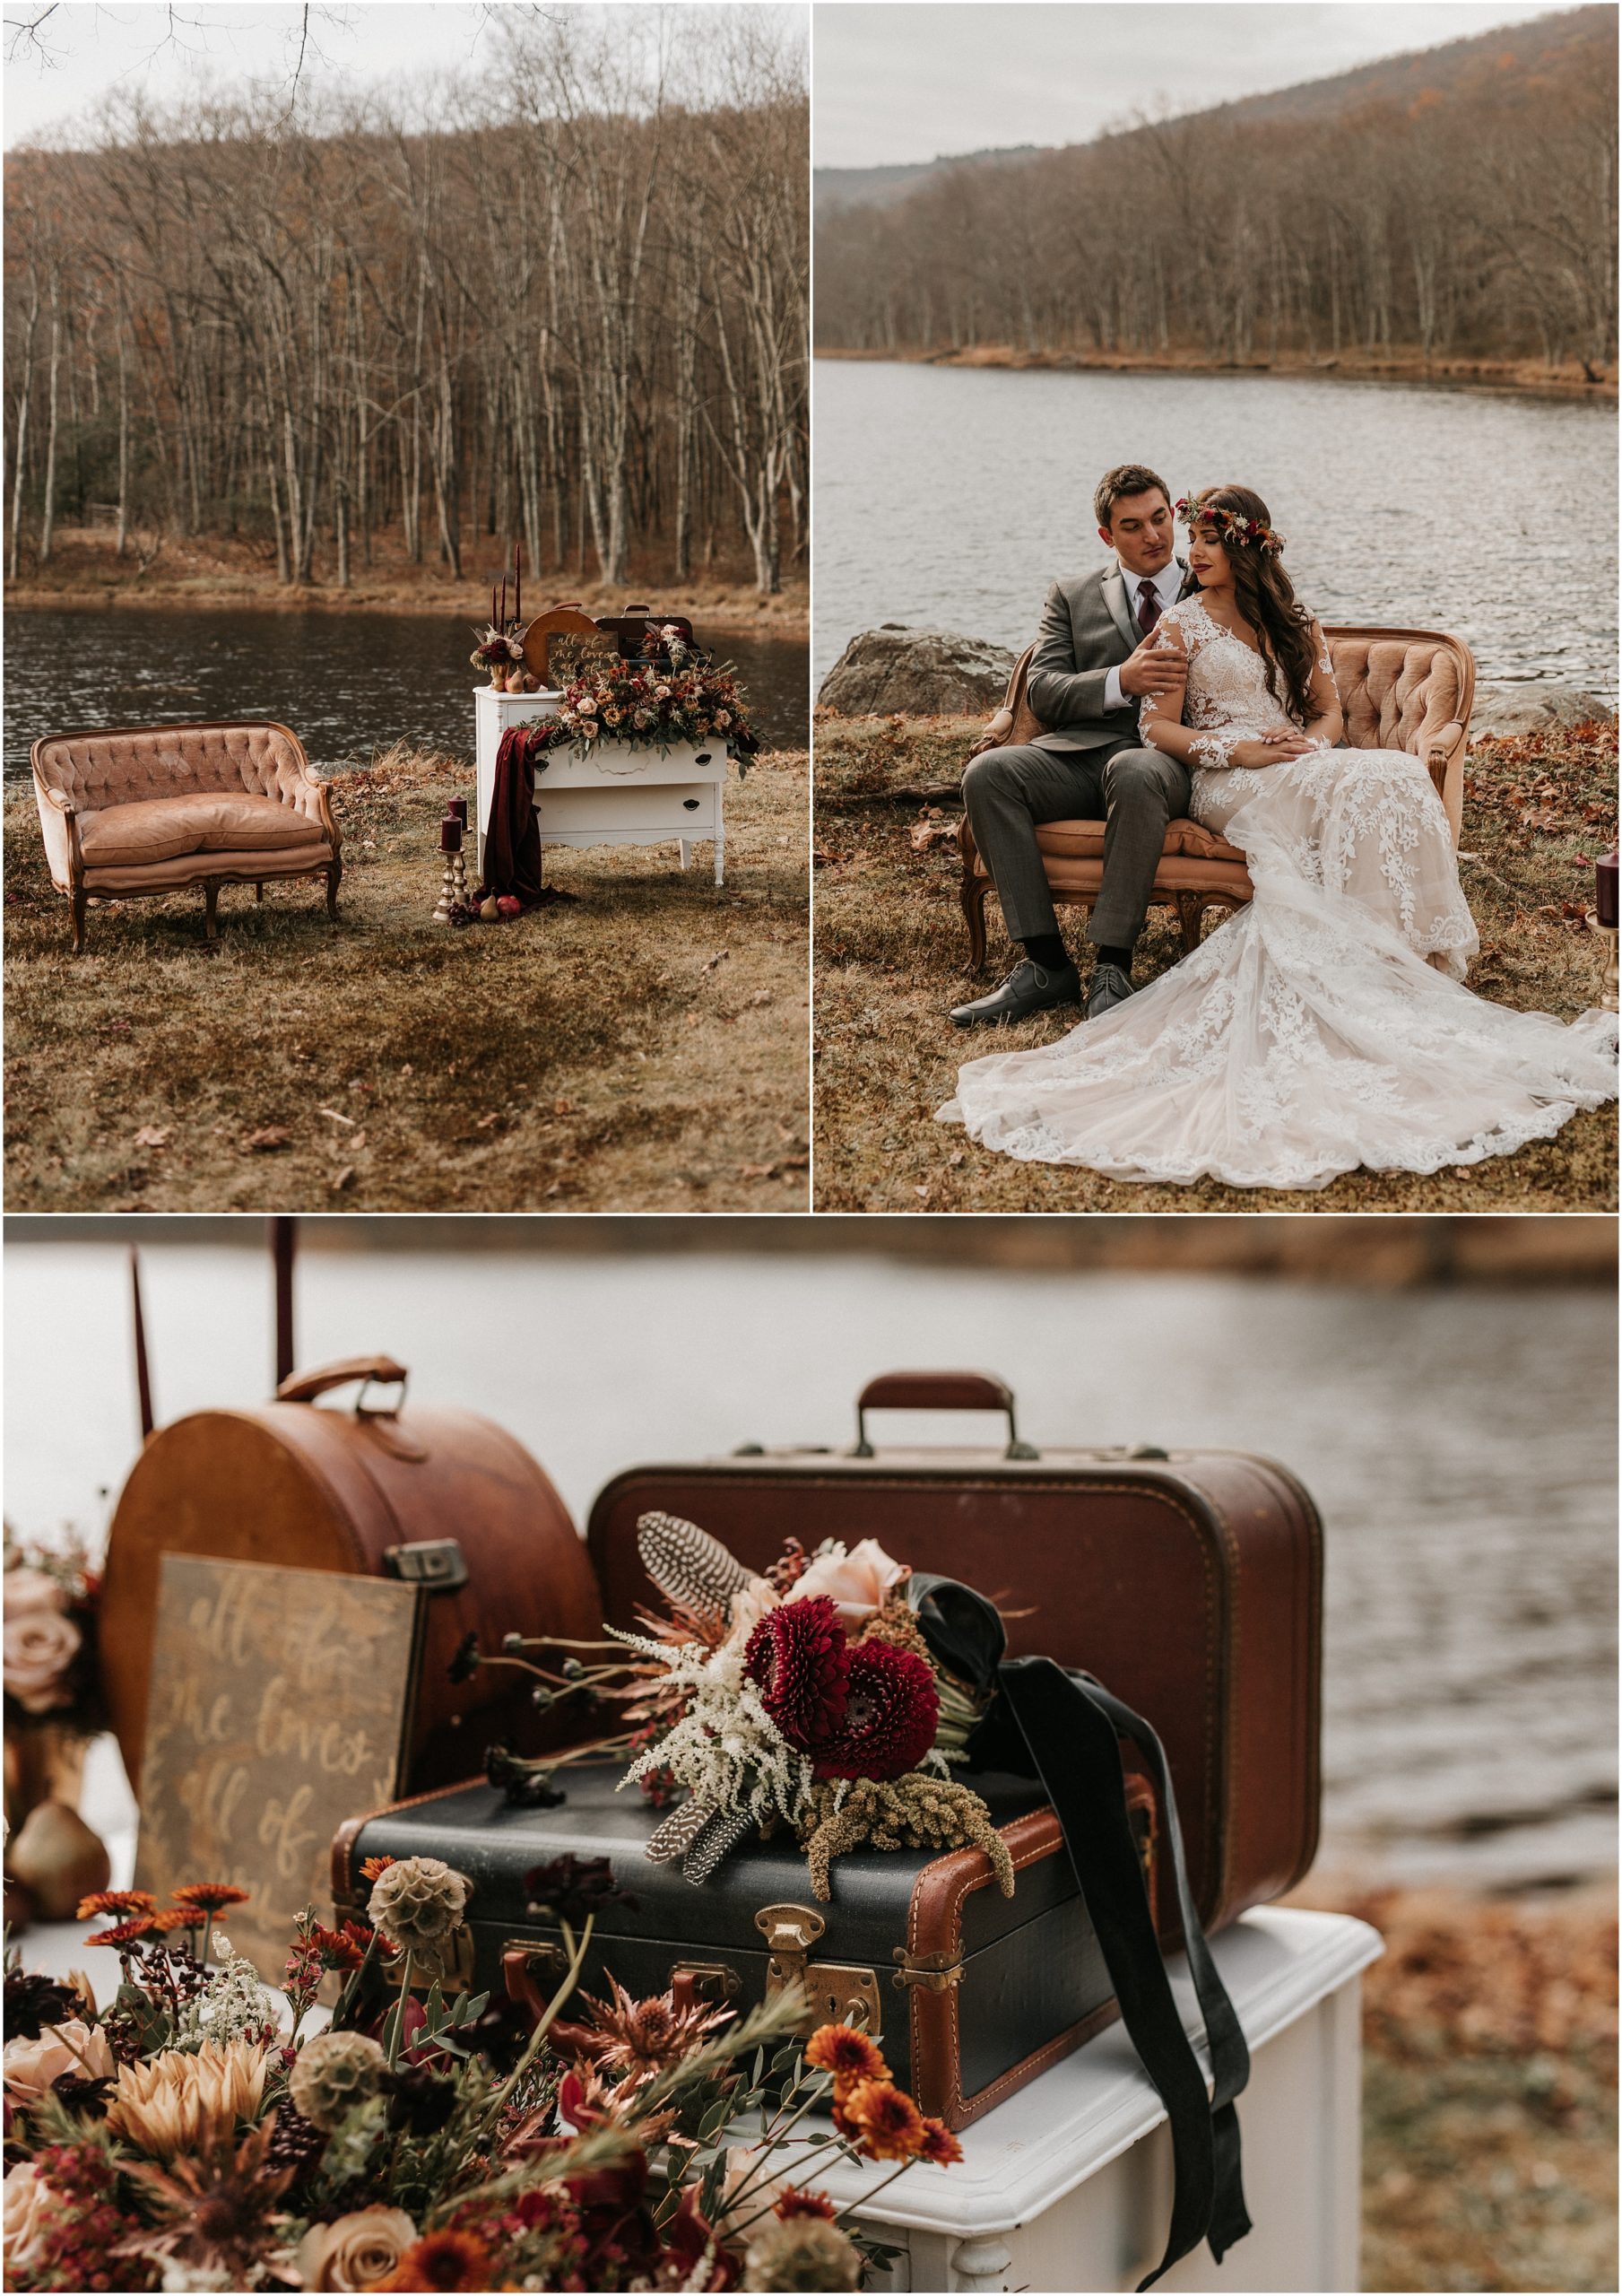 Fall Whimsical Outdoor Styled Wedding Portraits and Decor